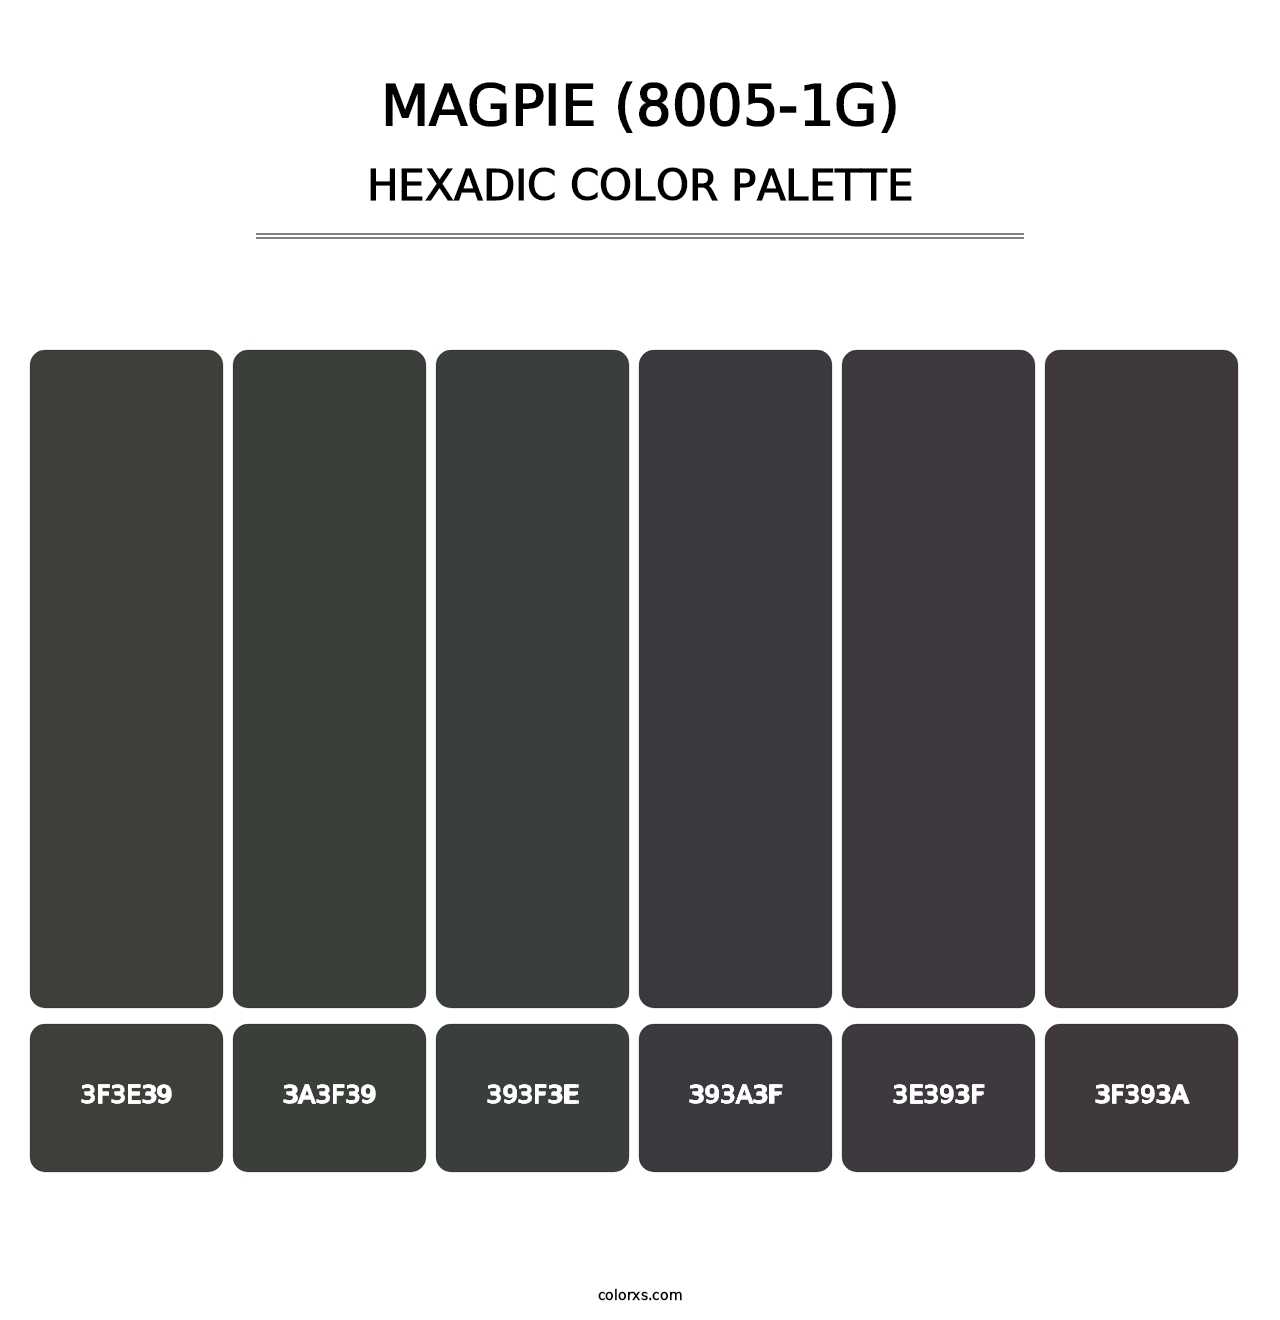 Magpie (8005-1G) - Hexadic Color Palette